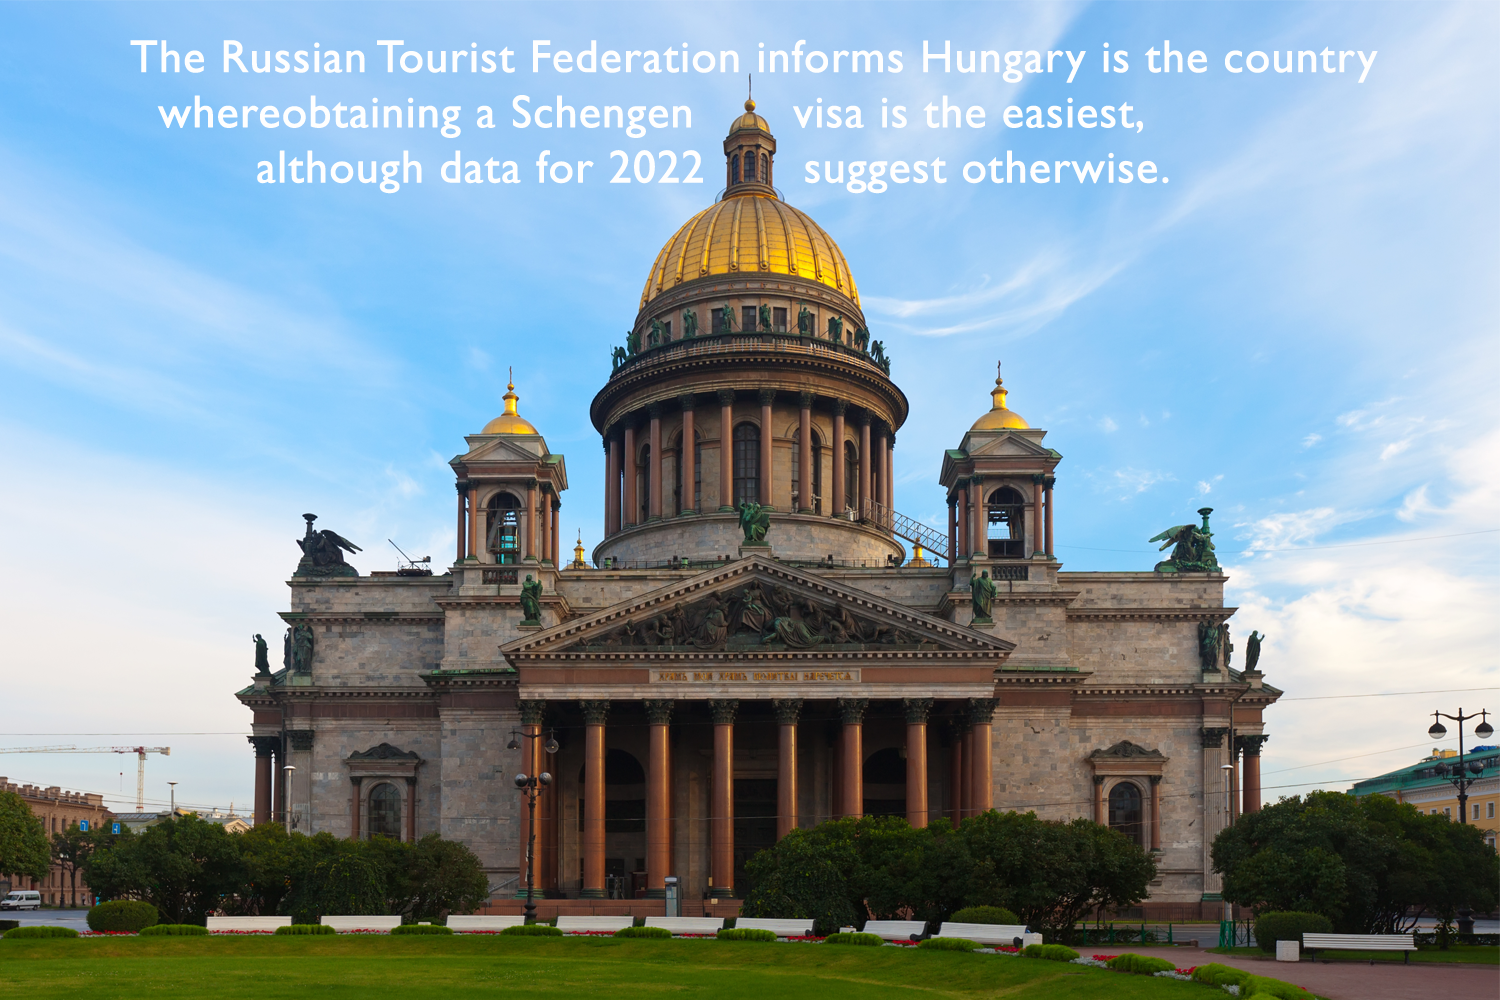 The Russian Tourist Federation informs Hungary is the country where obtaining a Schengen visa is the easiest, although data for 2022 suggest otherwise.